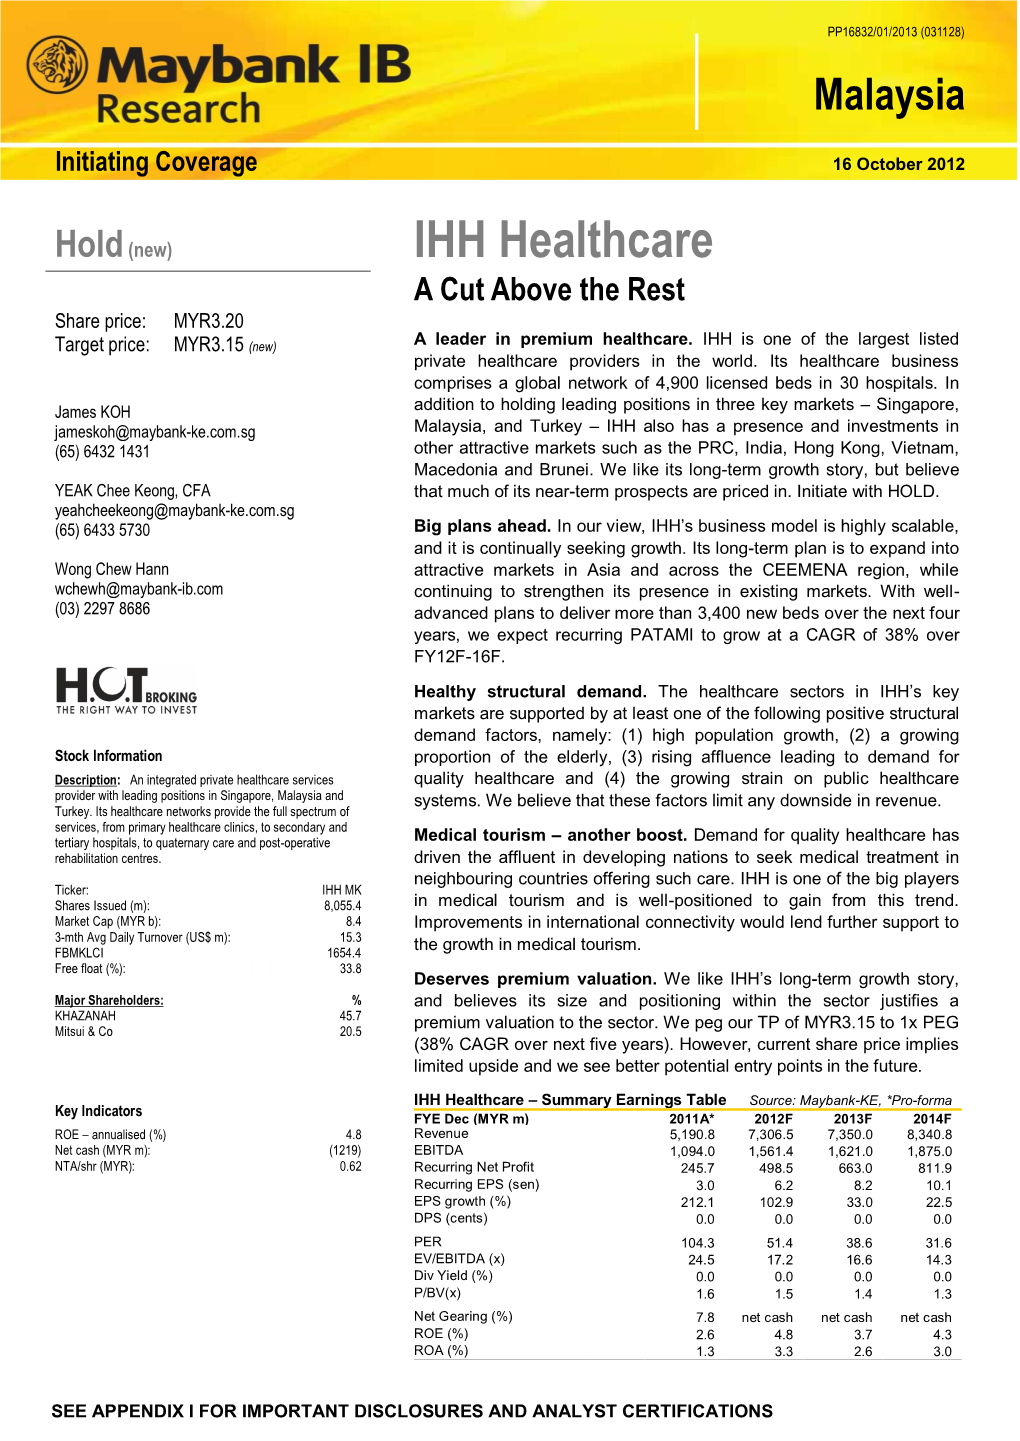 IHH Healthcare a Cut Above the Rest Share Price: MYR3.20 Target Price: MYR3.15 (New) a Leader in Premium Healthcare